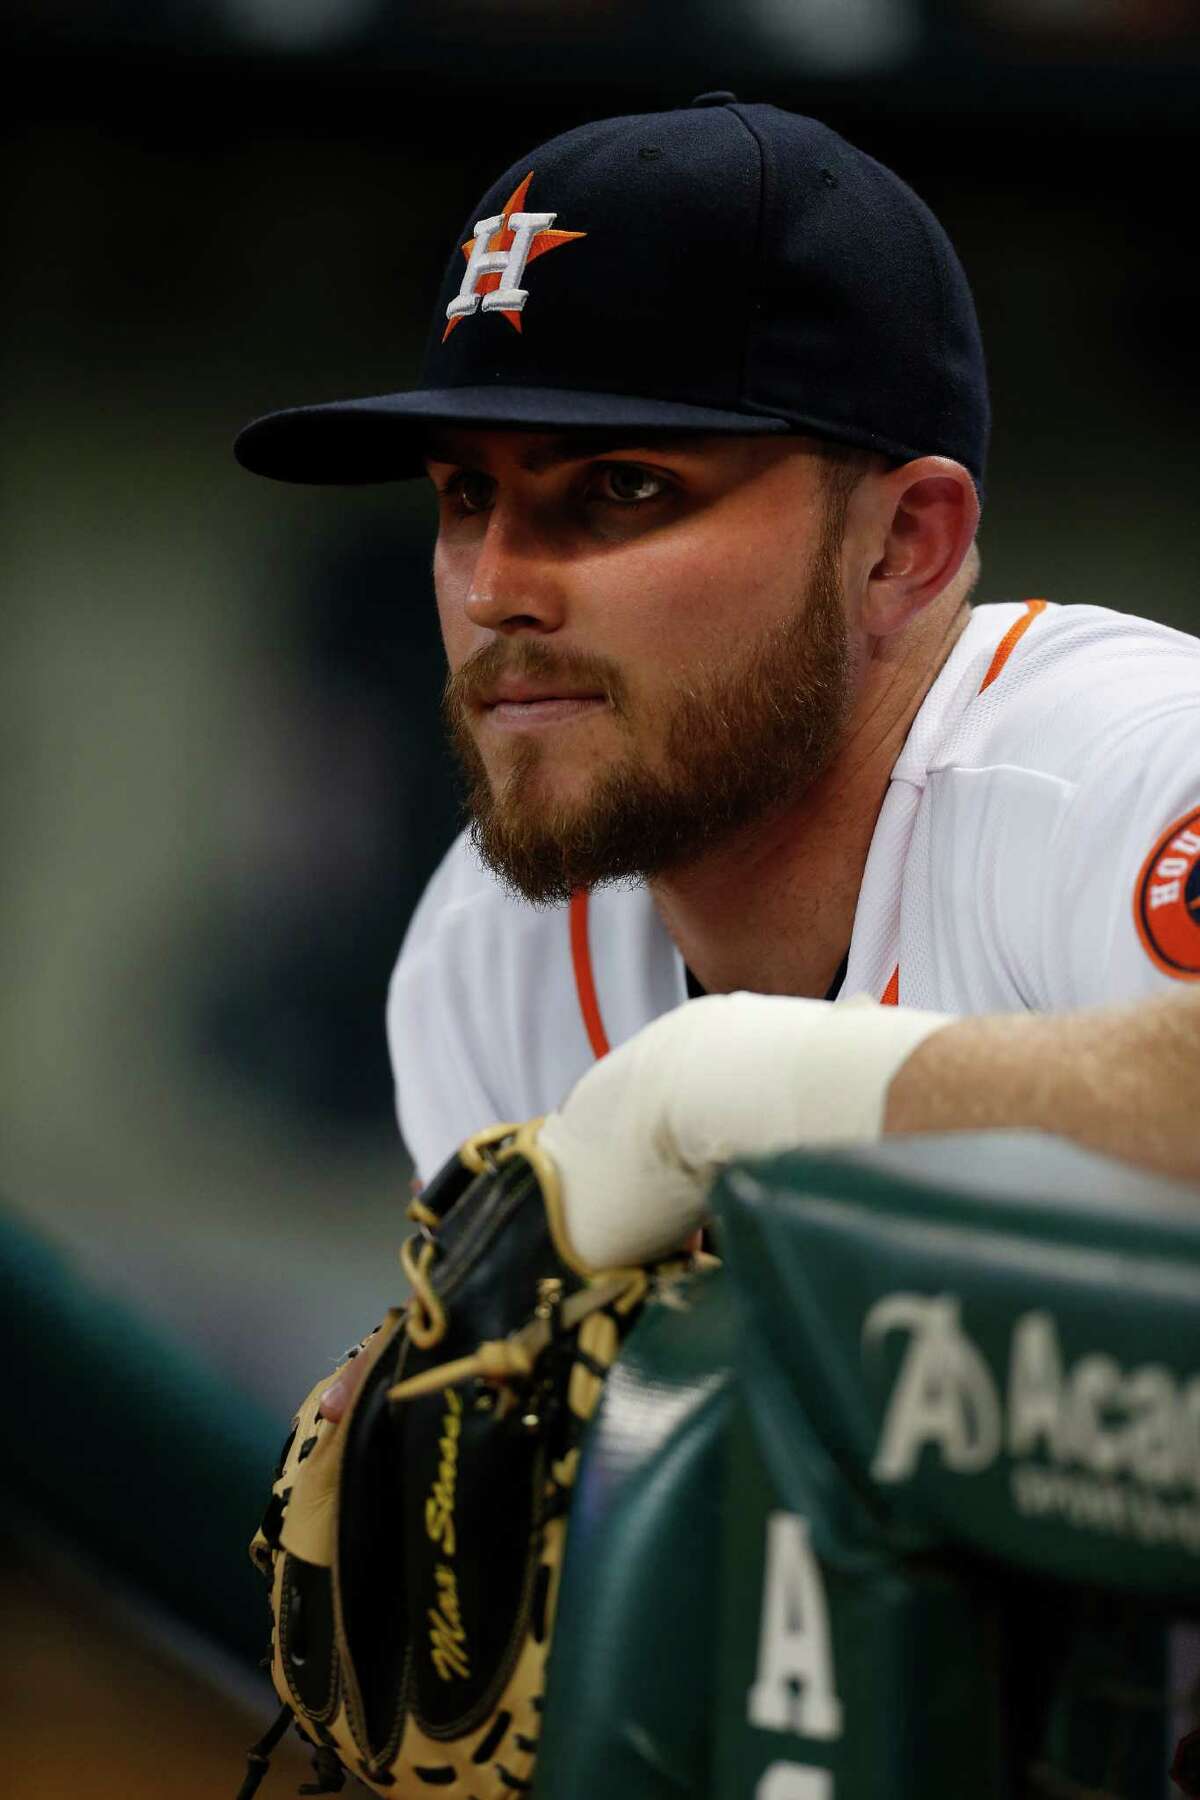 Max Stassi finds consistent stroke for Astros